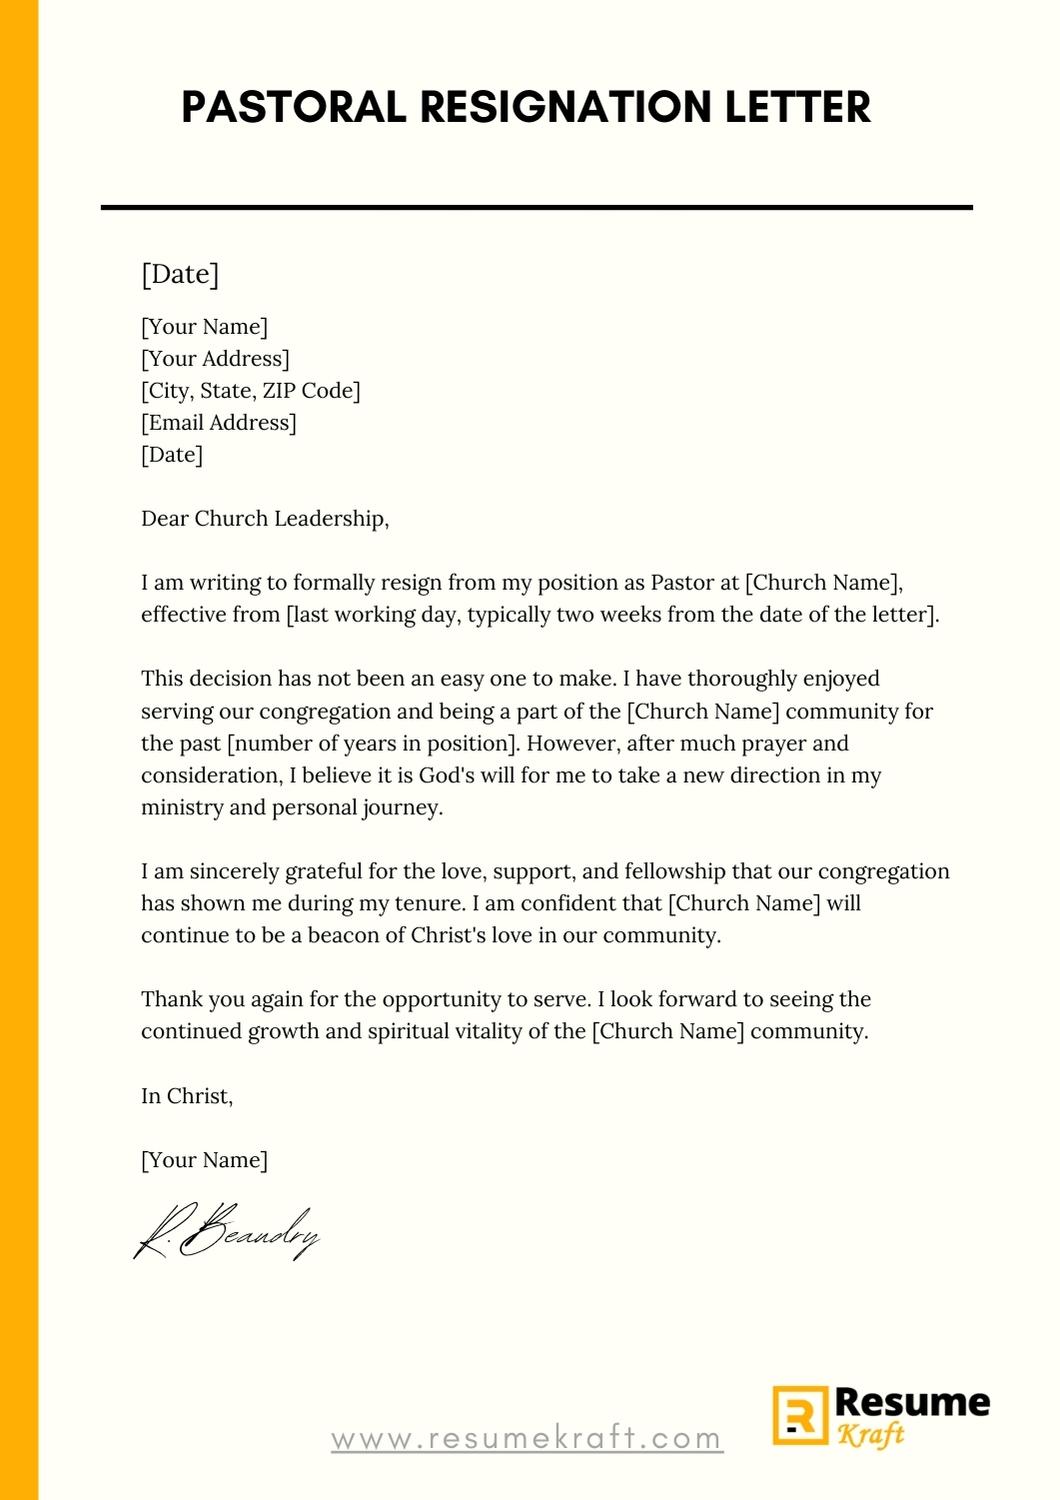 How to Write a Pastoral Resignation Letter (With Samples) 2023 ...